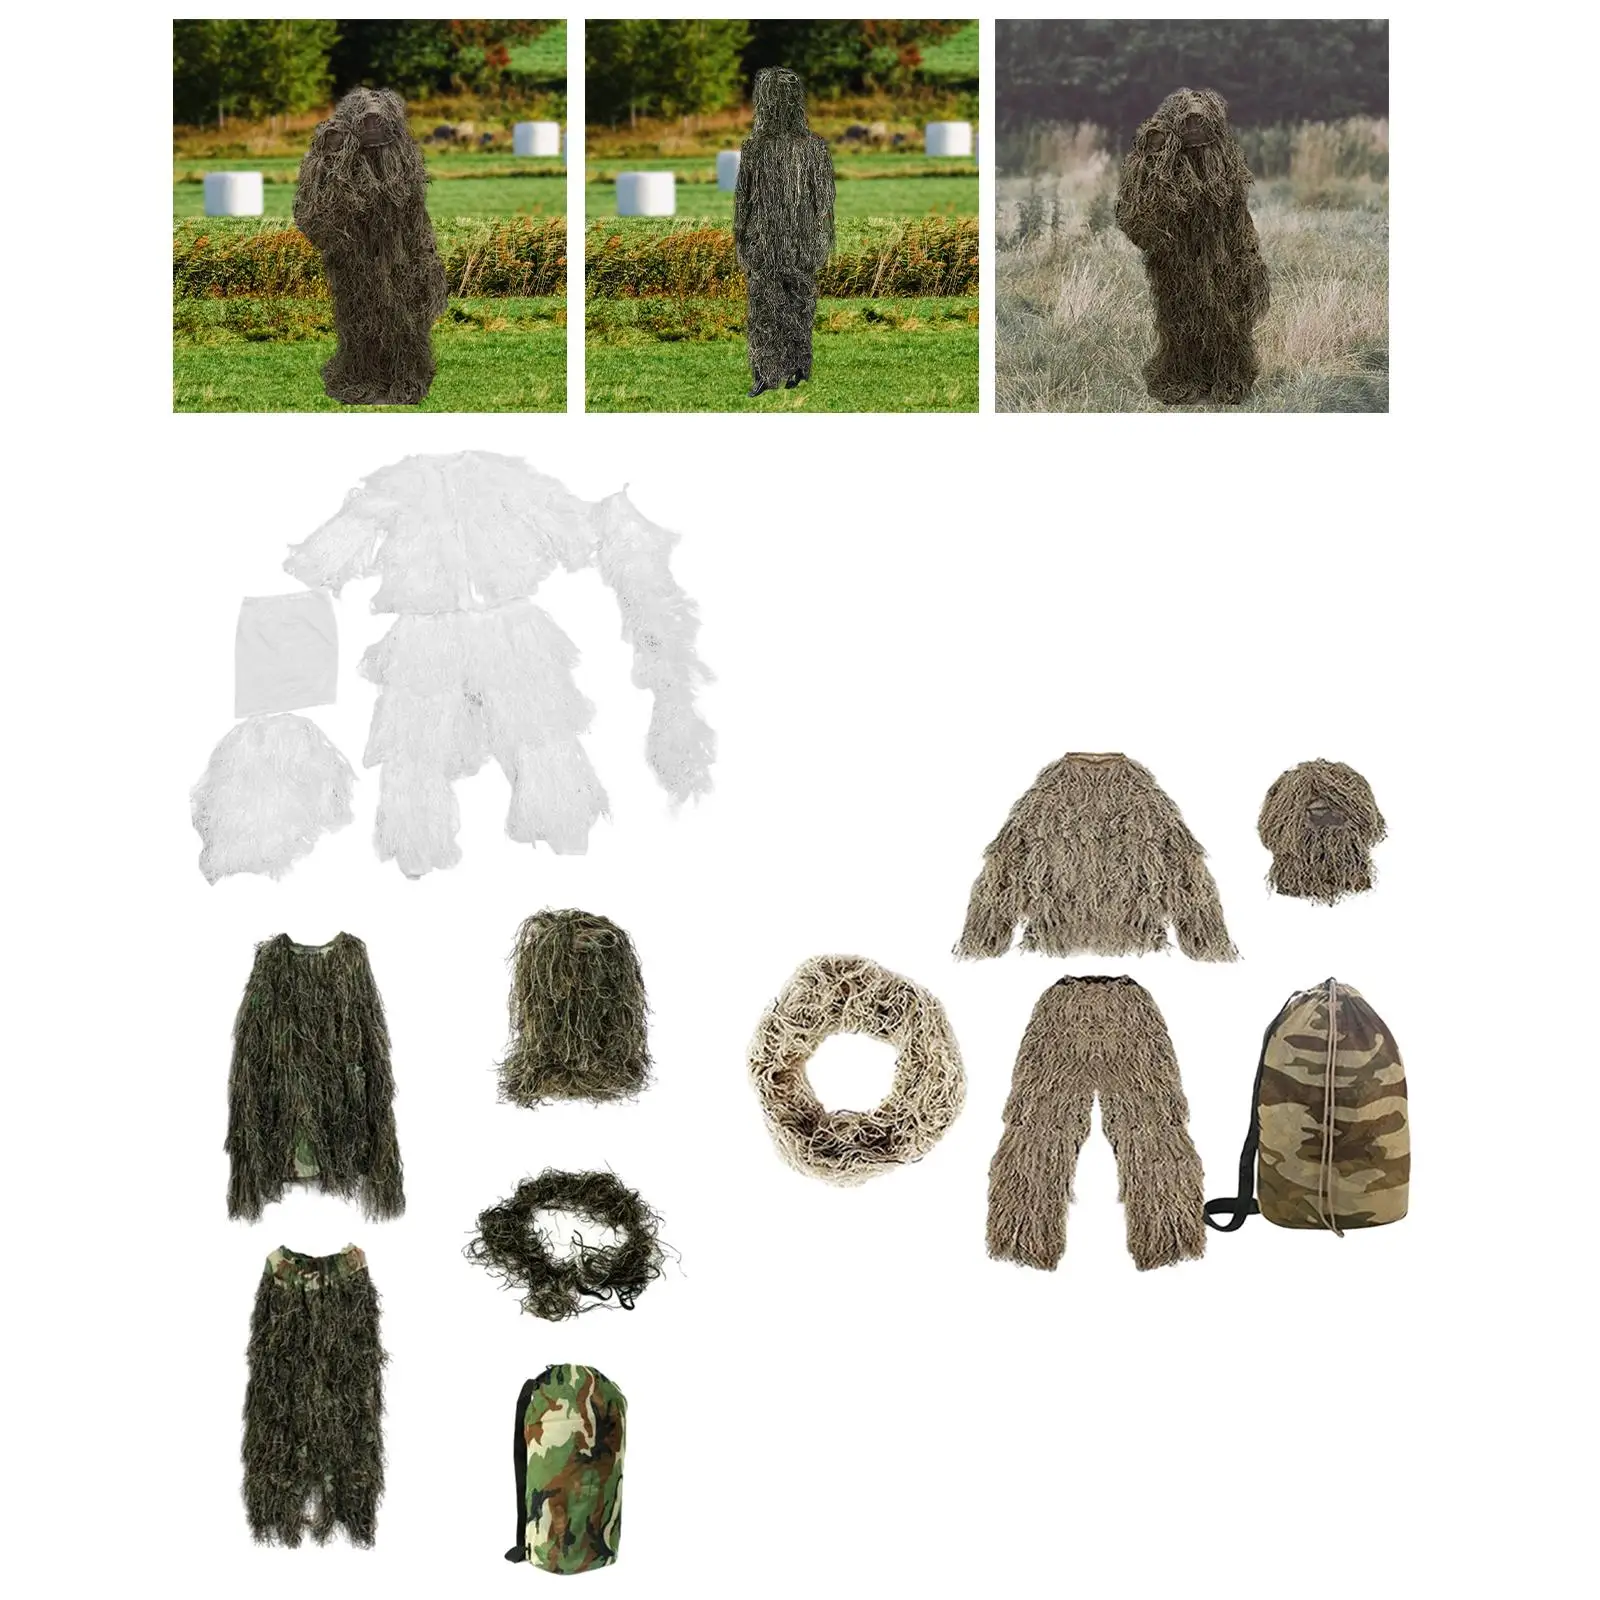 Kids Ghillie Suit Pants Woodland Apparel Fancy Dress Clothes Outfit Clothing for Game Bird Watching Jungle Camping Accessories